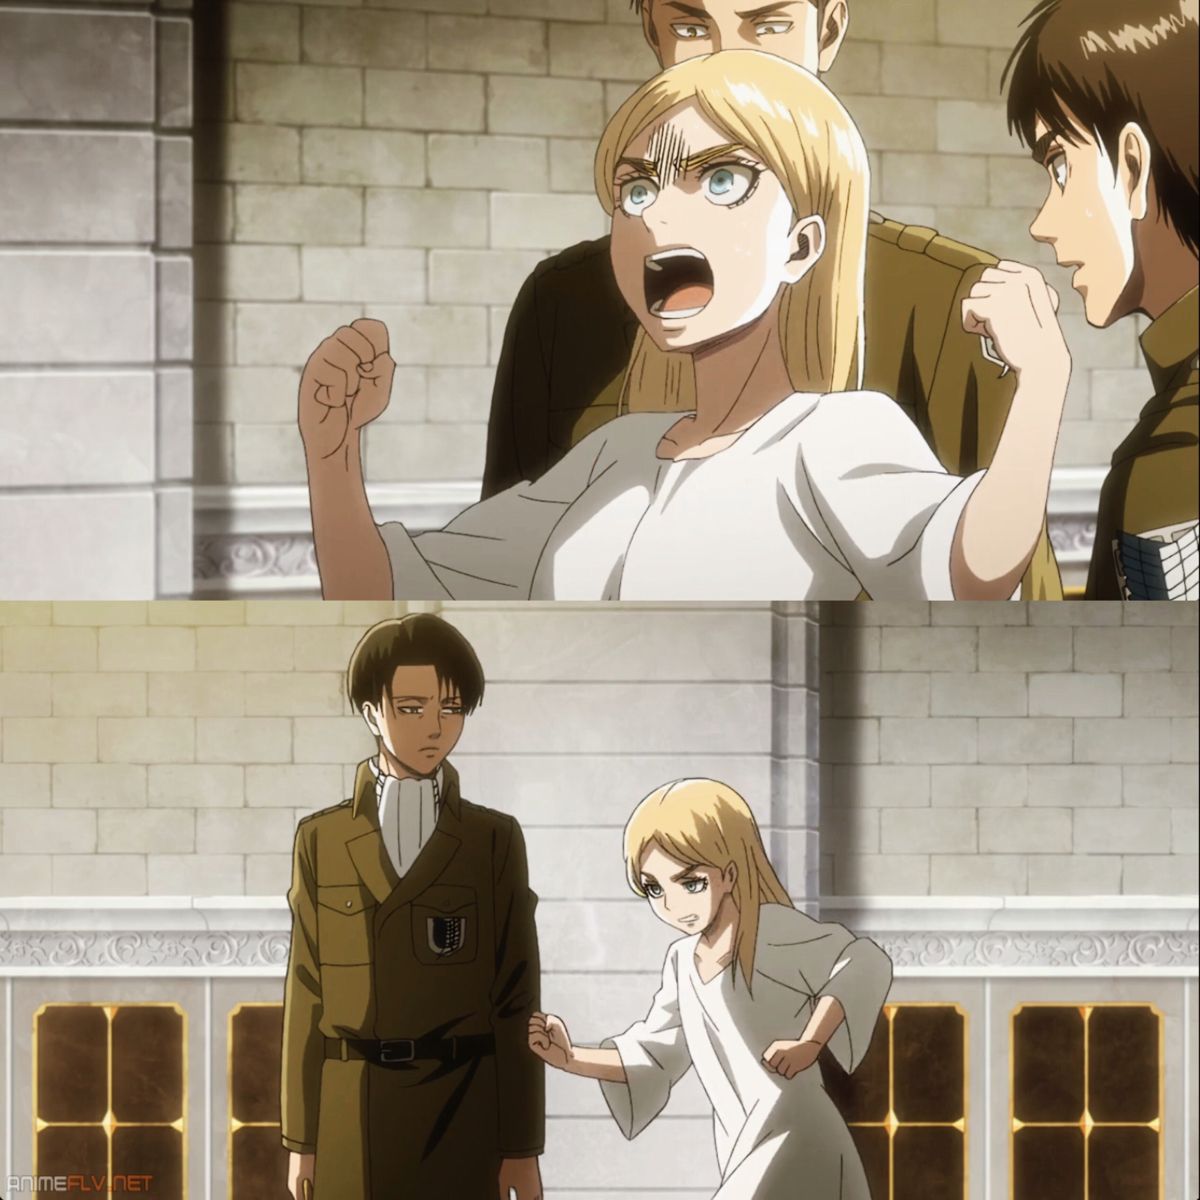 How did Levi react when Historia hit him?